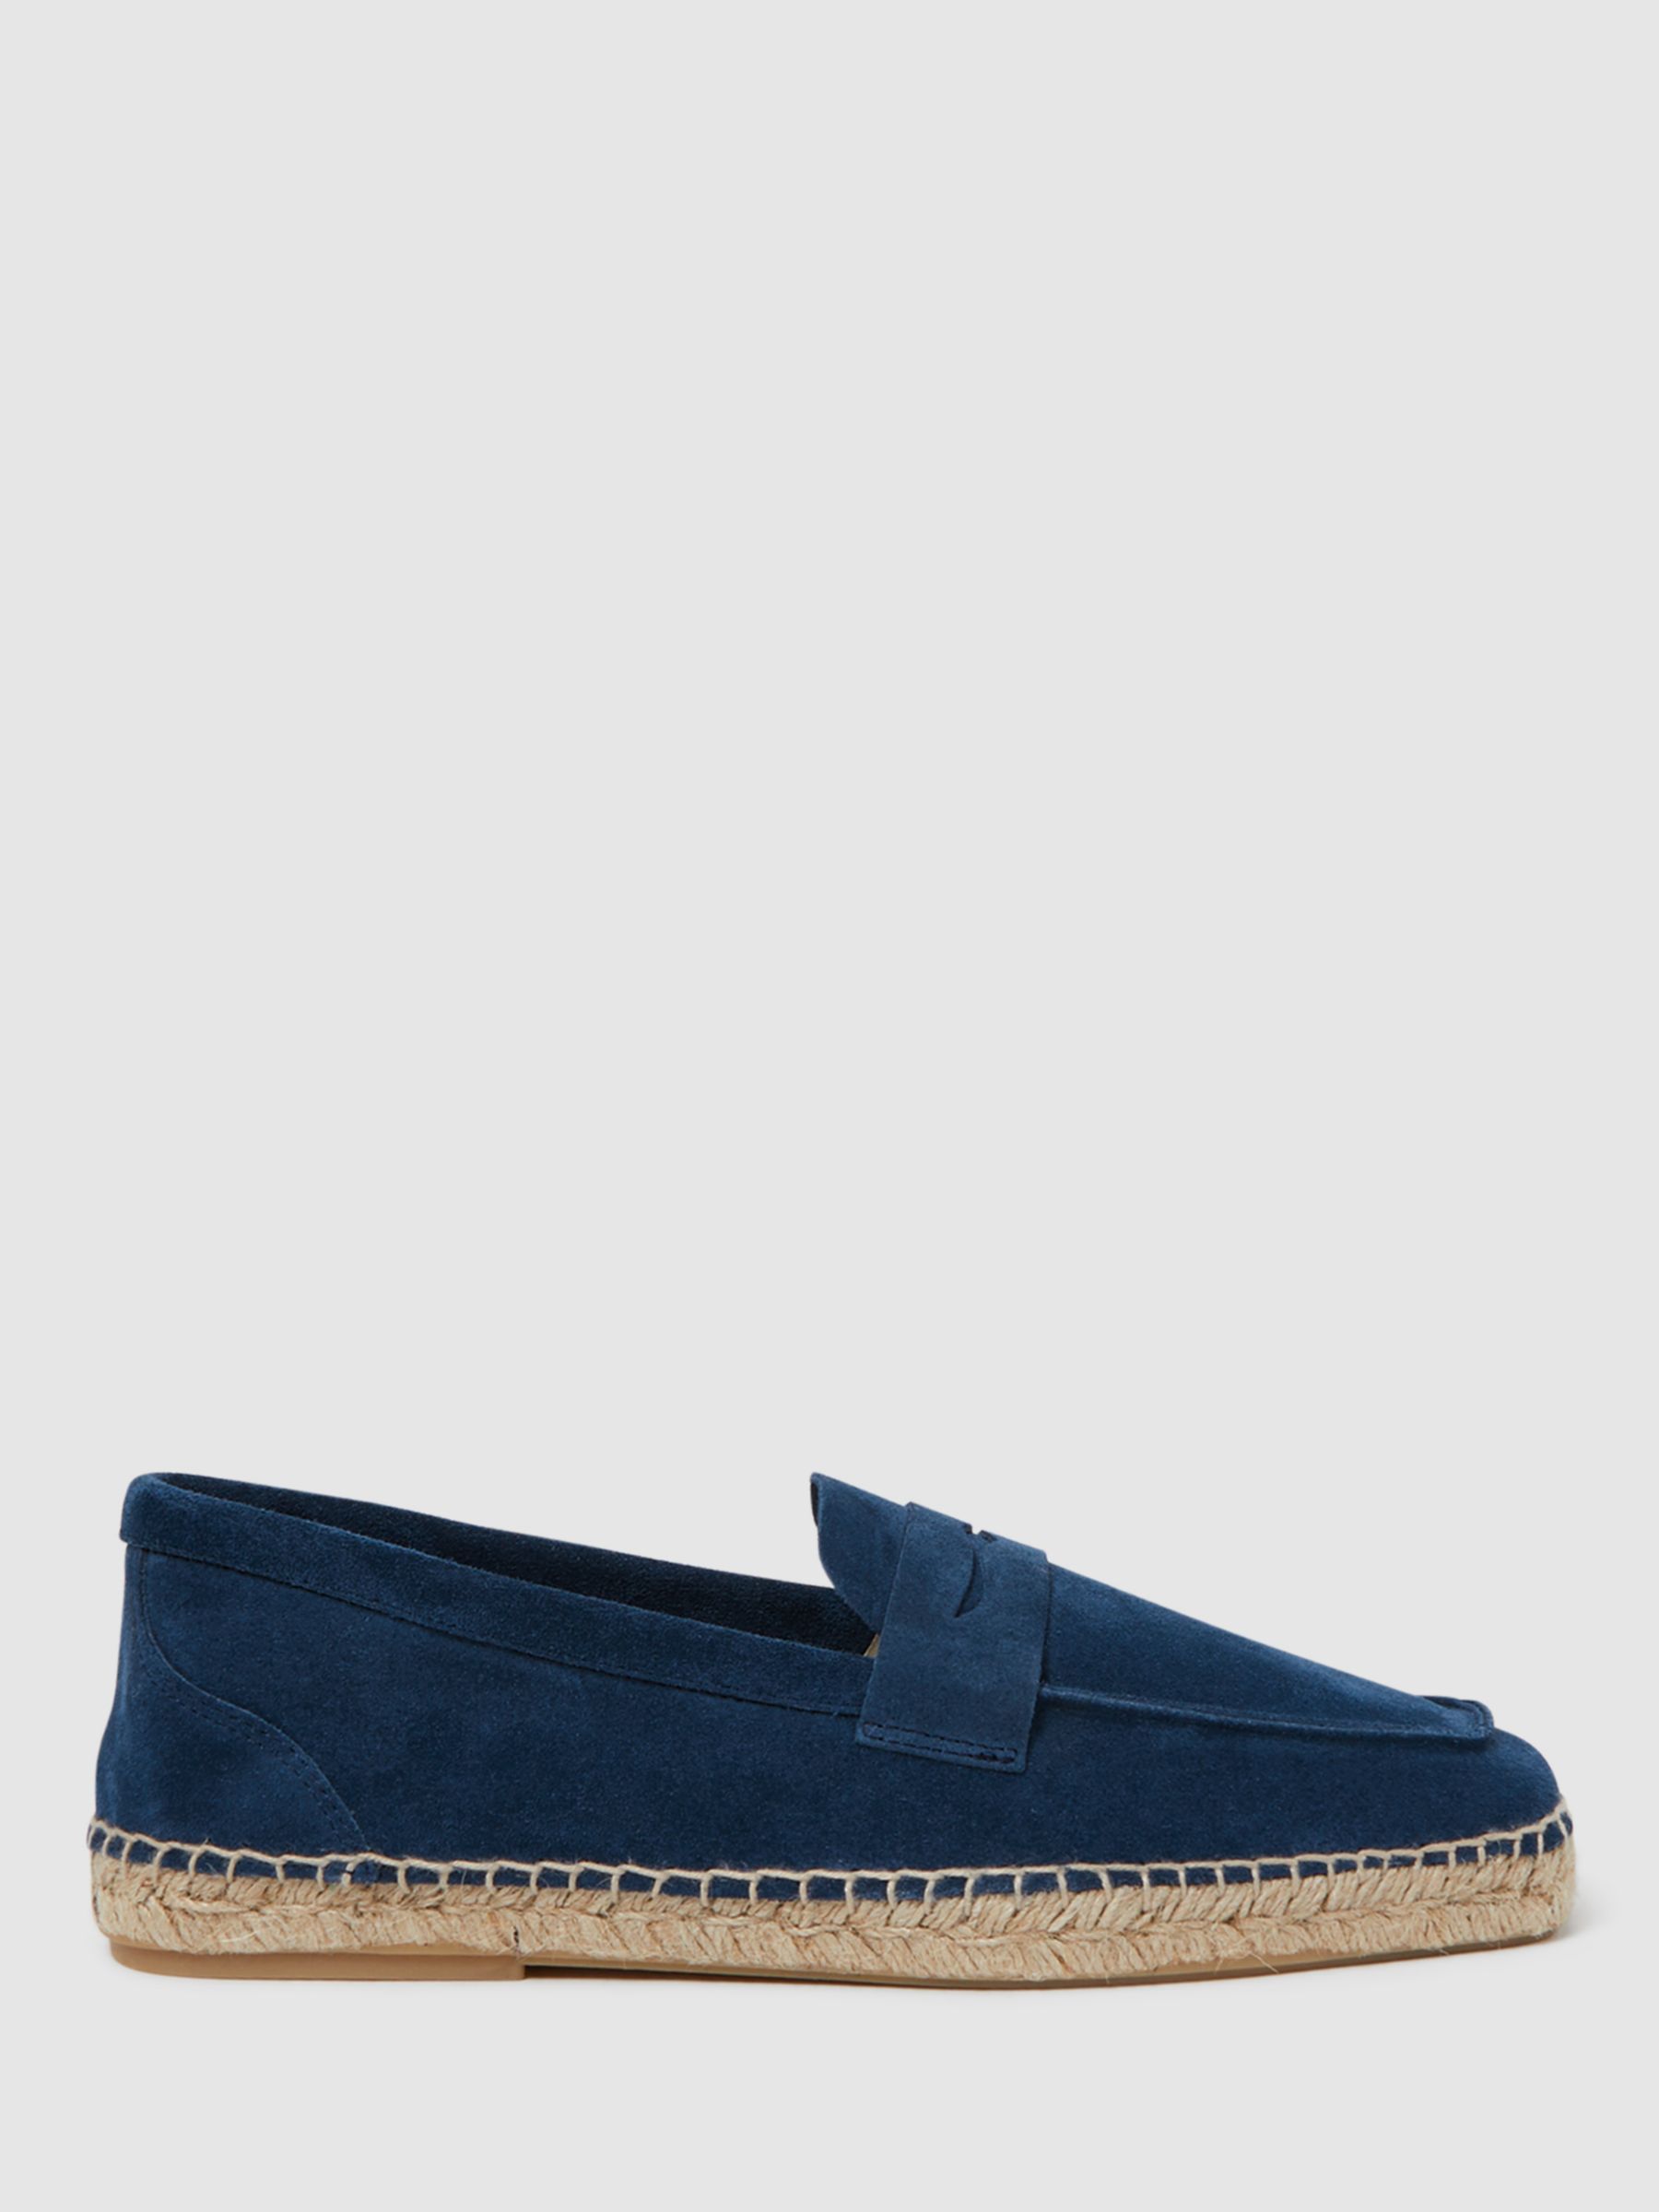 Reiss Suede Leather Espadrilles